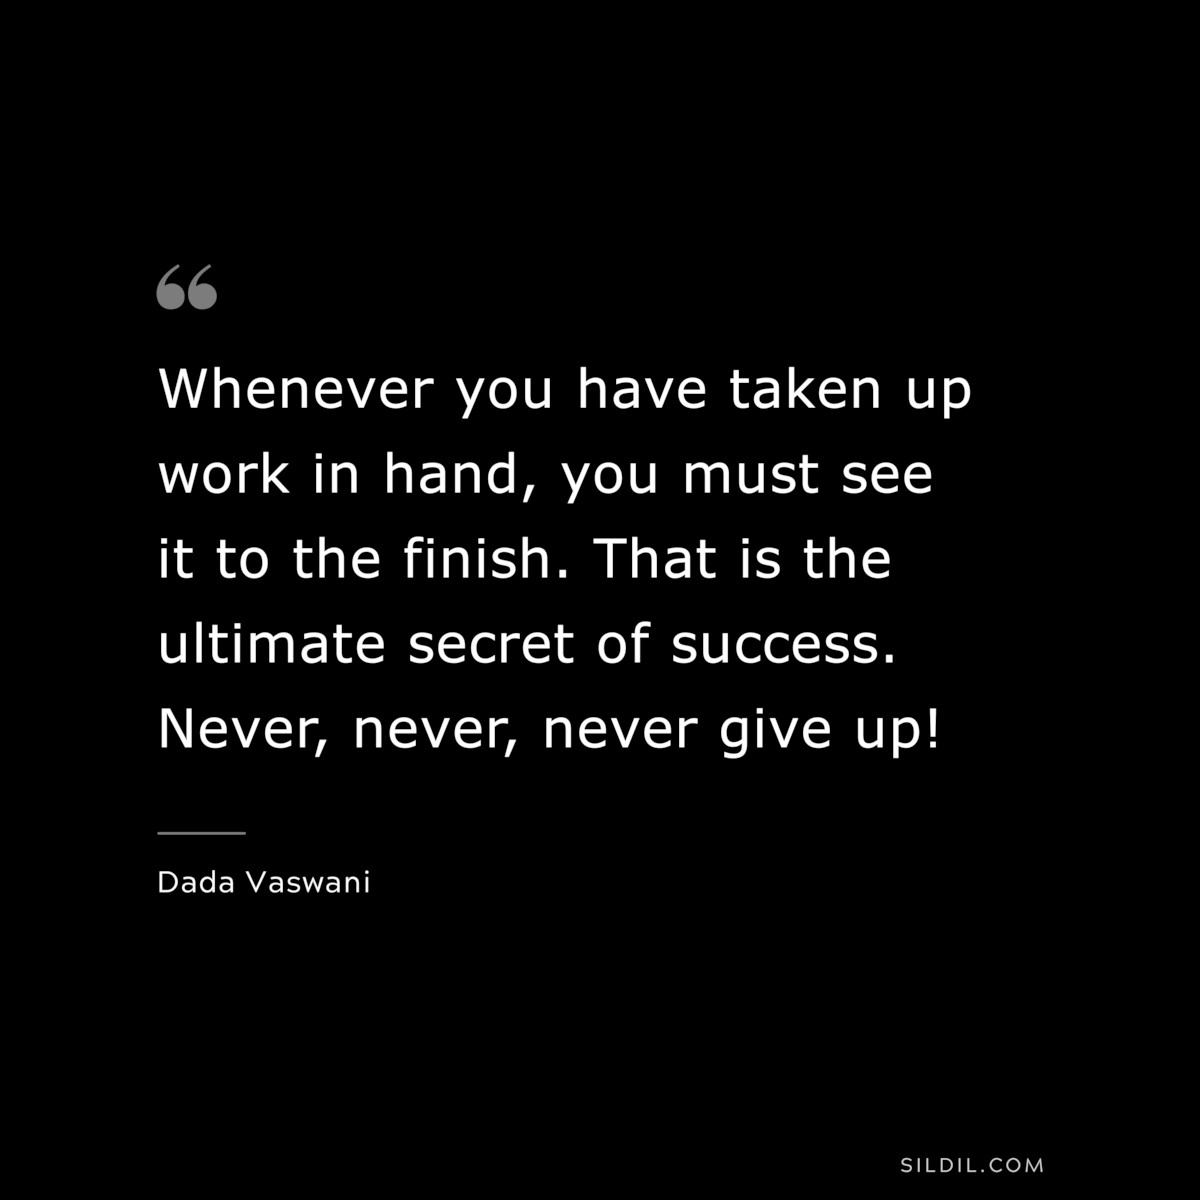 Whenever you have taken up work in hand, you must see it to the finish. That is the ultimate secret of success. Never, never, never give up! ― Dada Vaswani